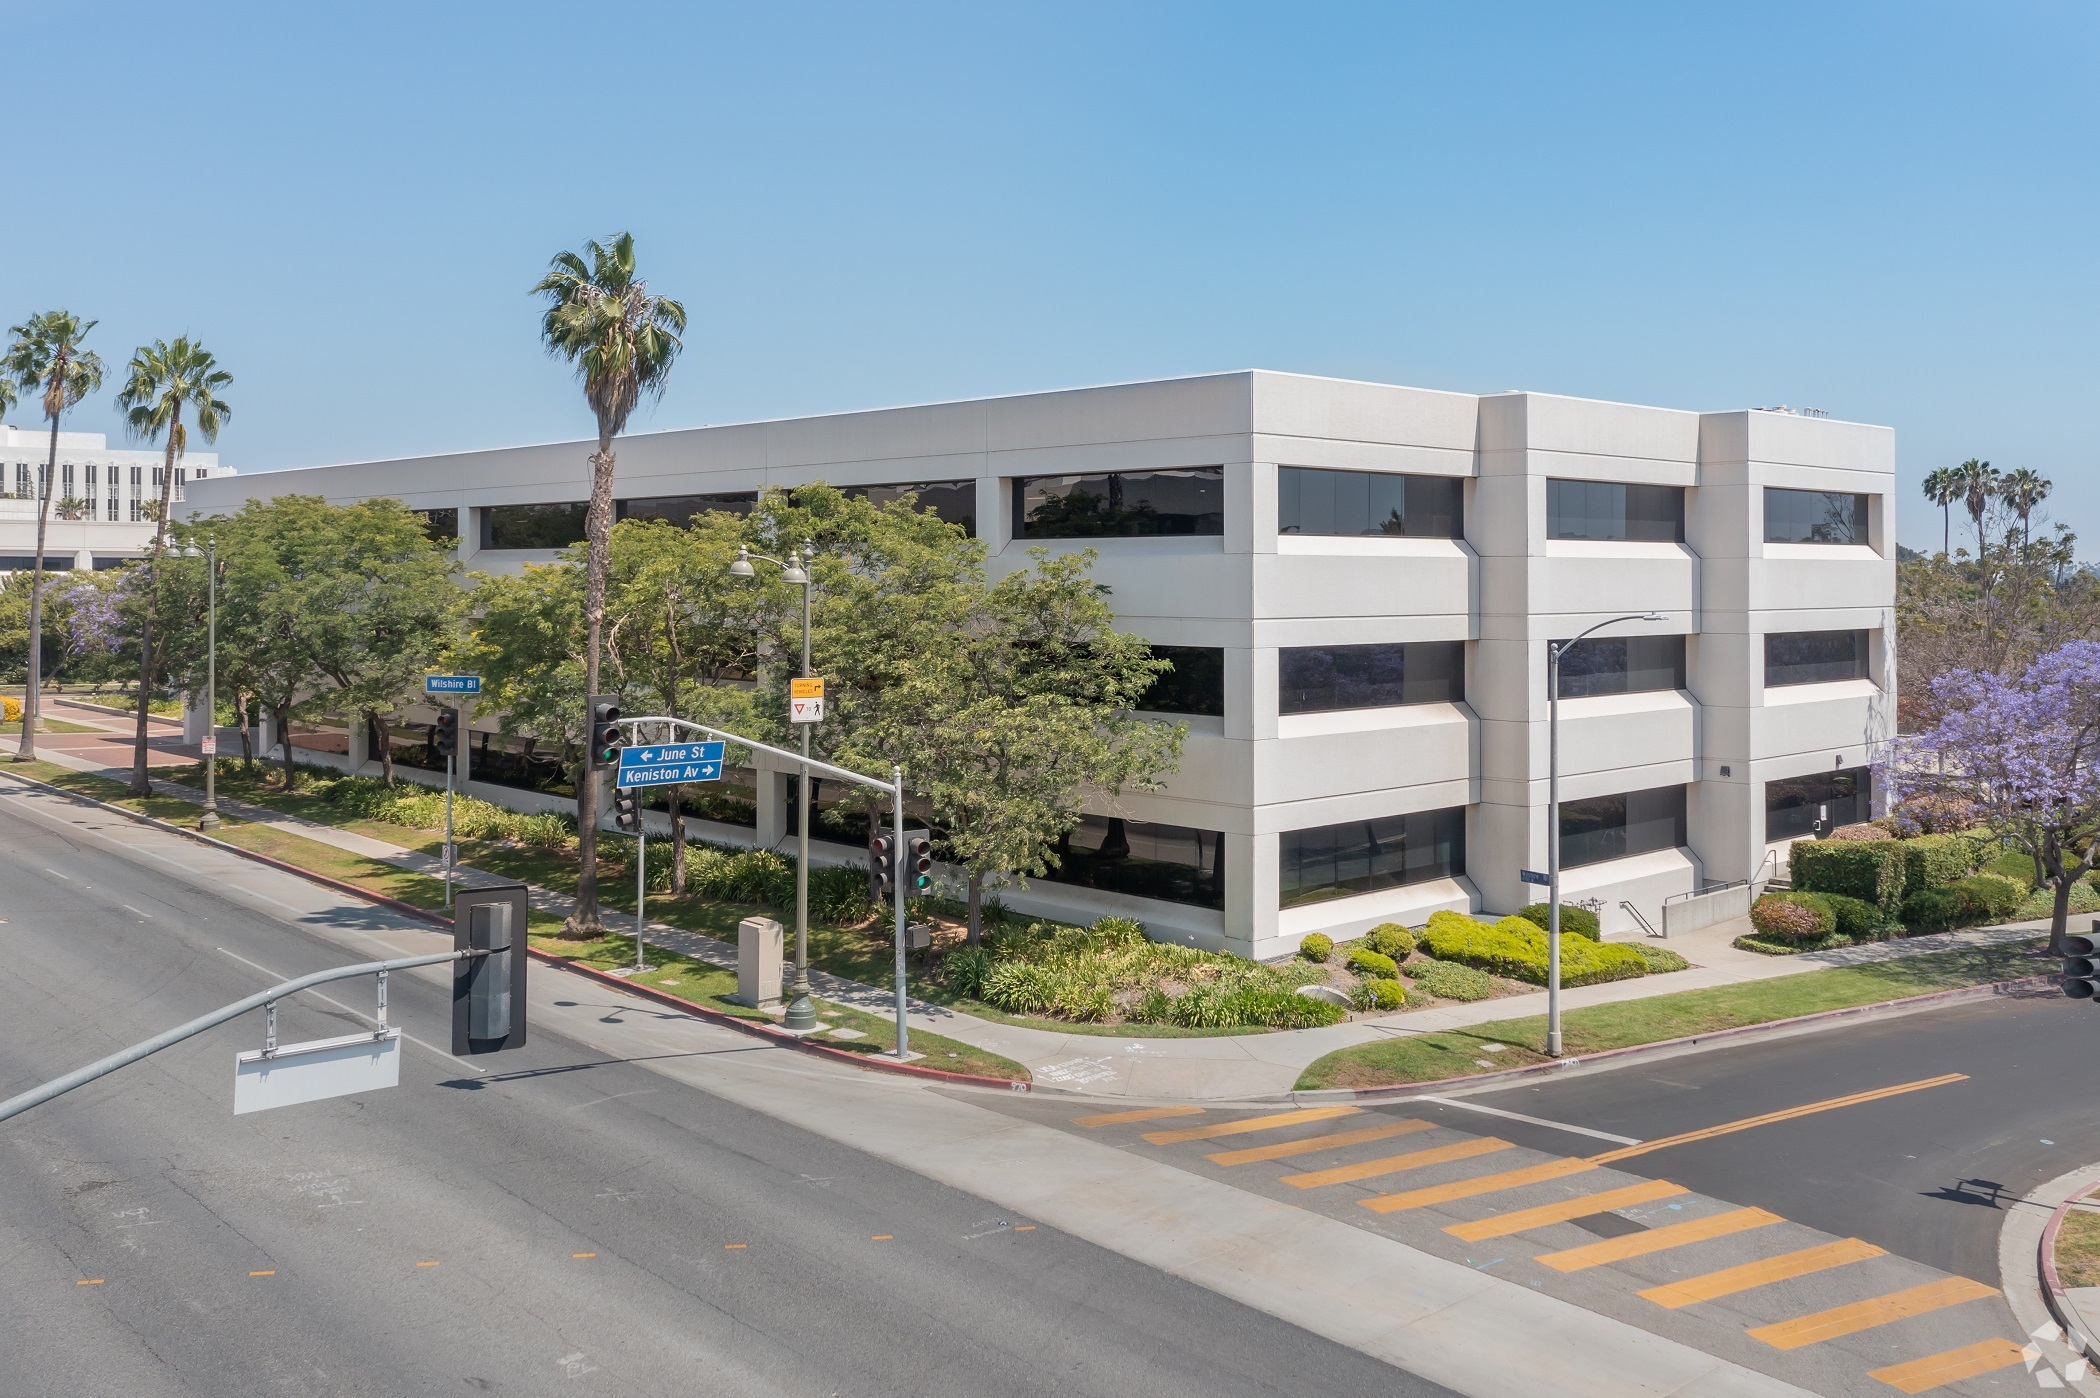 The roughly 143,000-square-foot 4750 Wilshire Blvd. office in Los Angeles is expected to undergo a partial conversion into residential space. (CoStar)